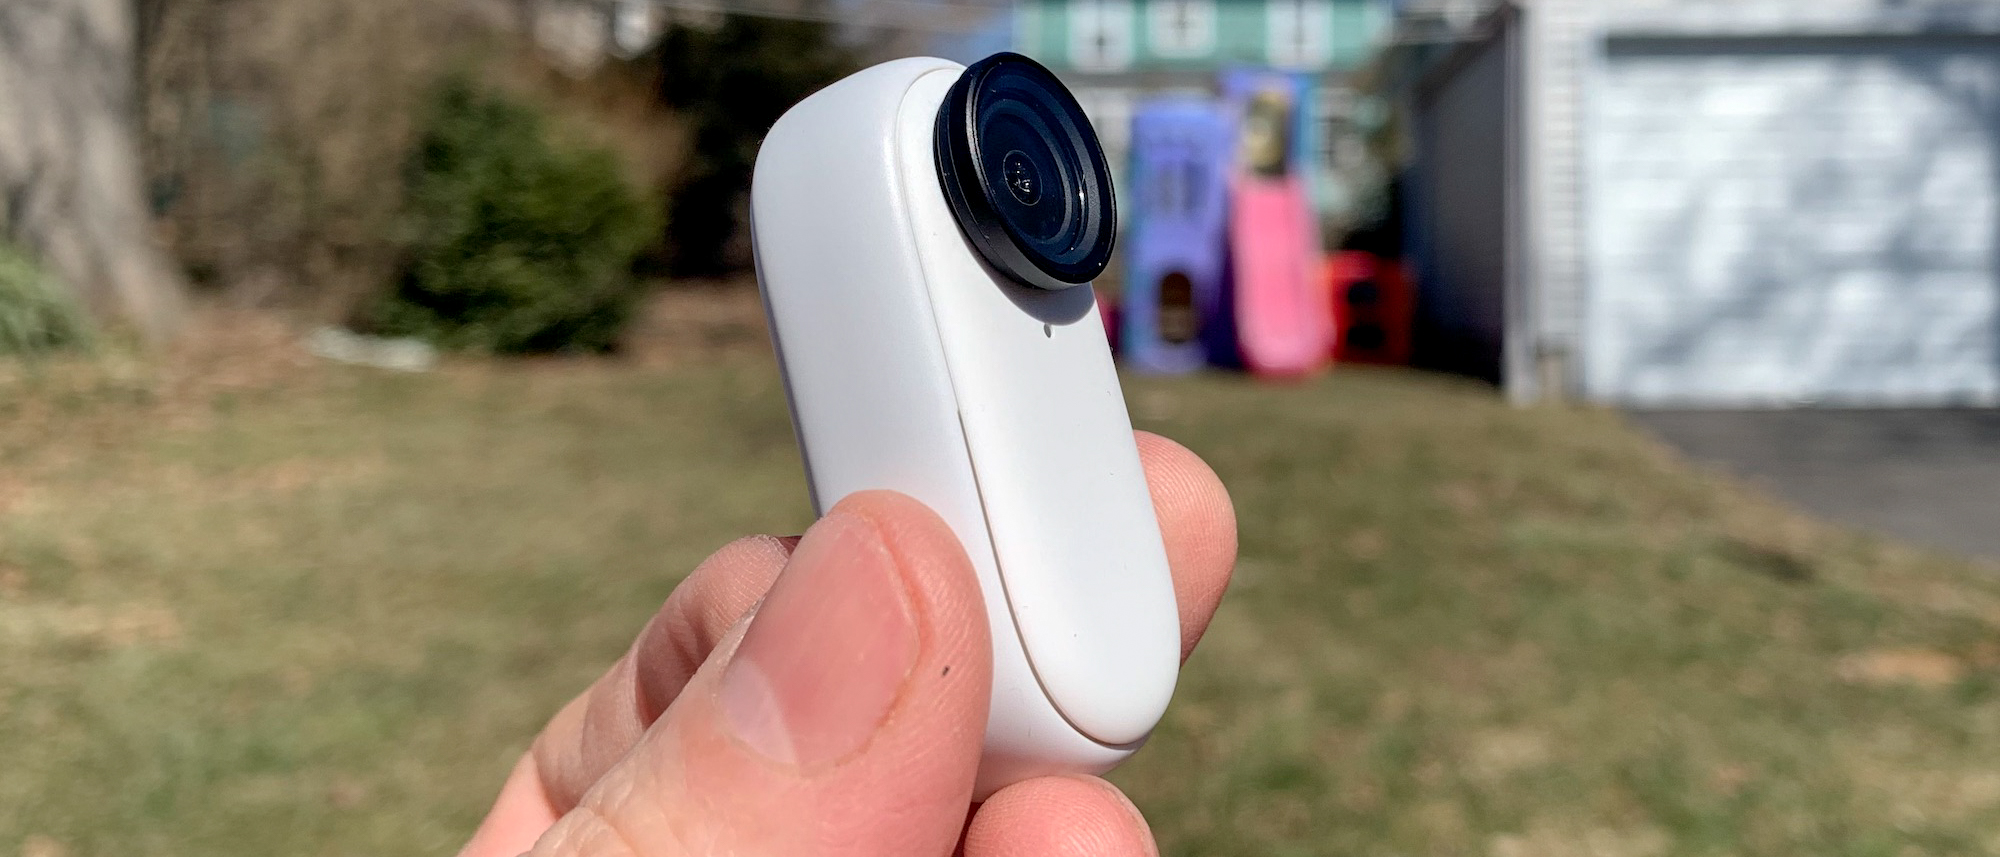 Insta360 Go 2 review: A tiny action camera with a great remote